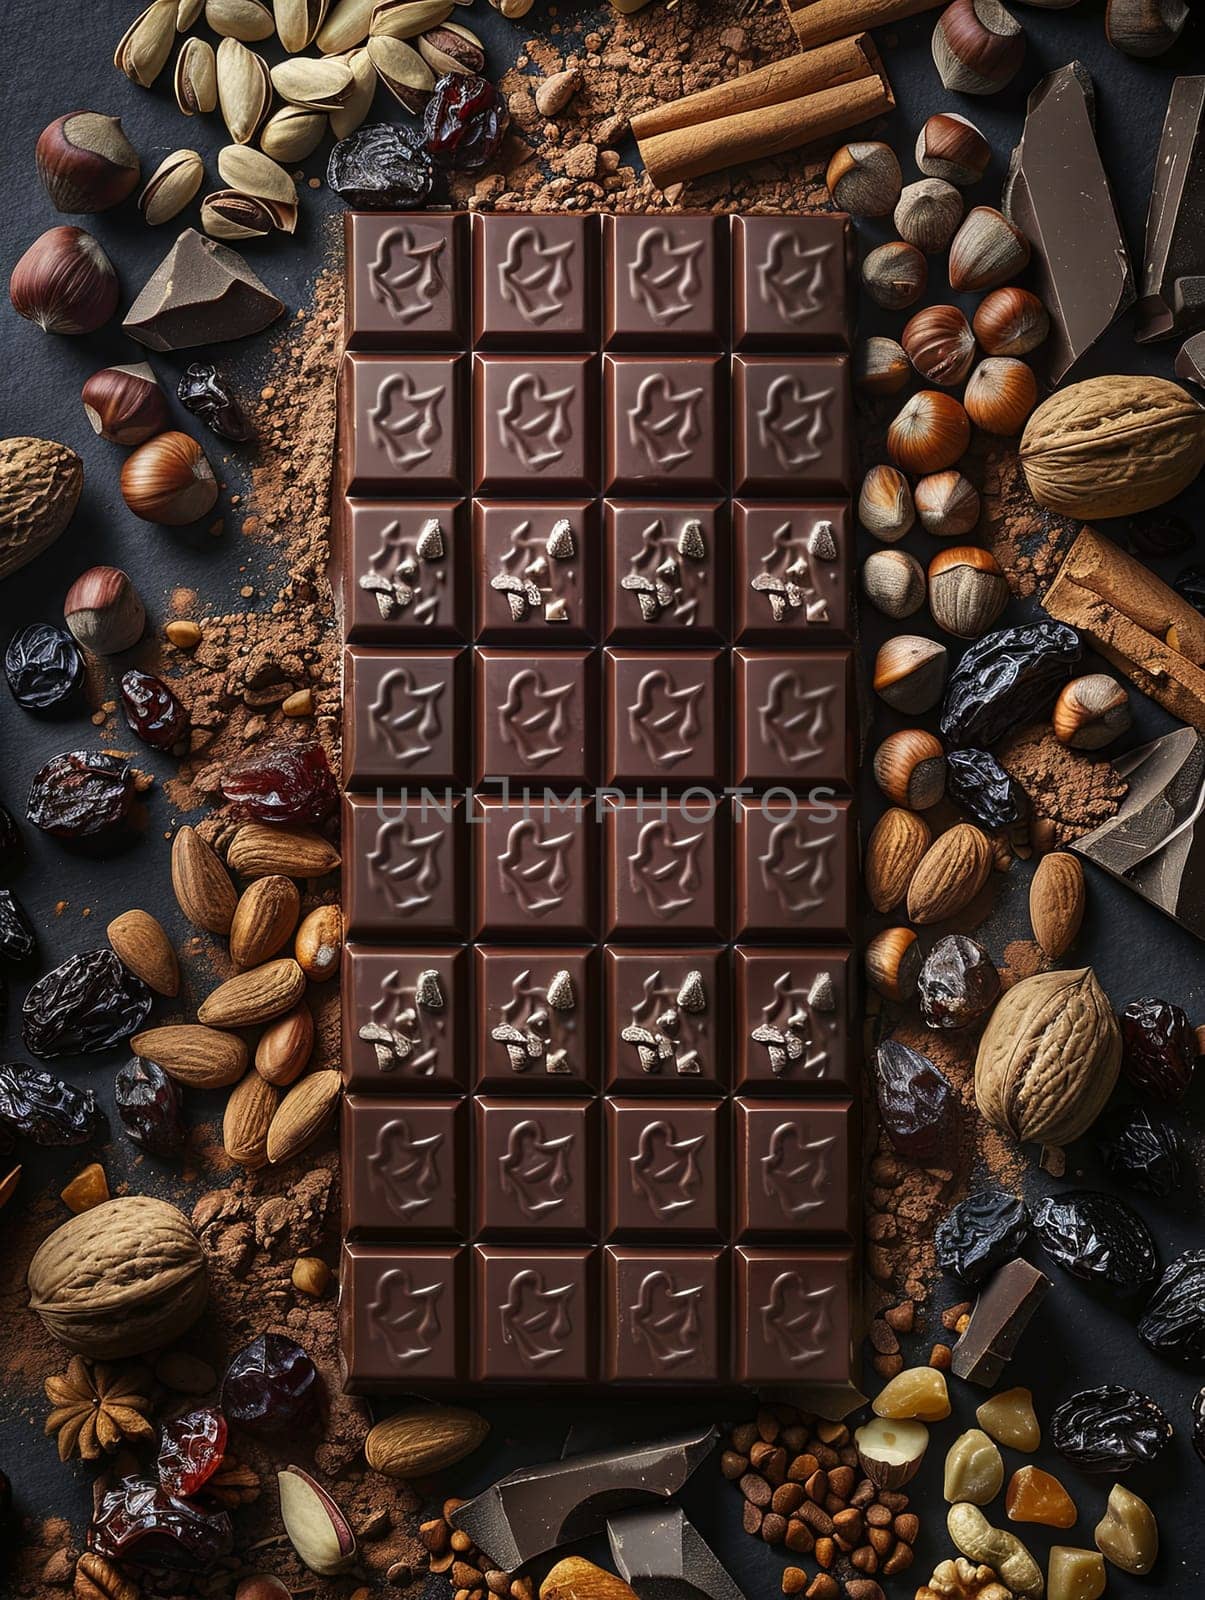 A bar of chocolate nestled among a variety of nuts and chocolate pieces.